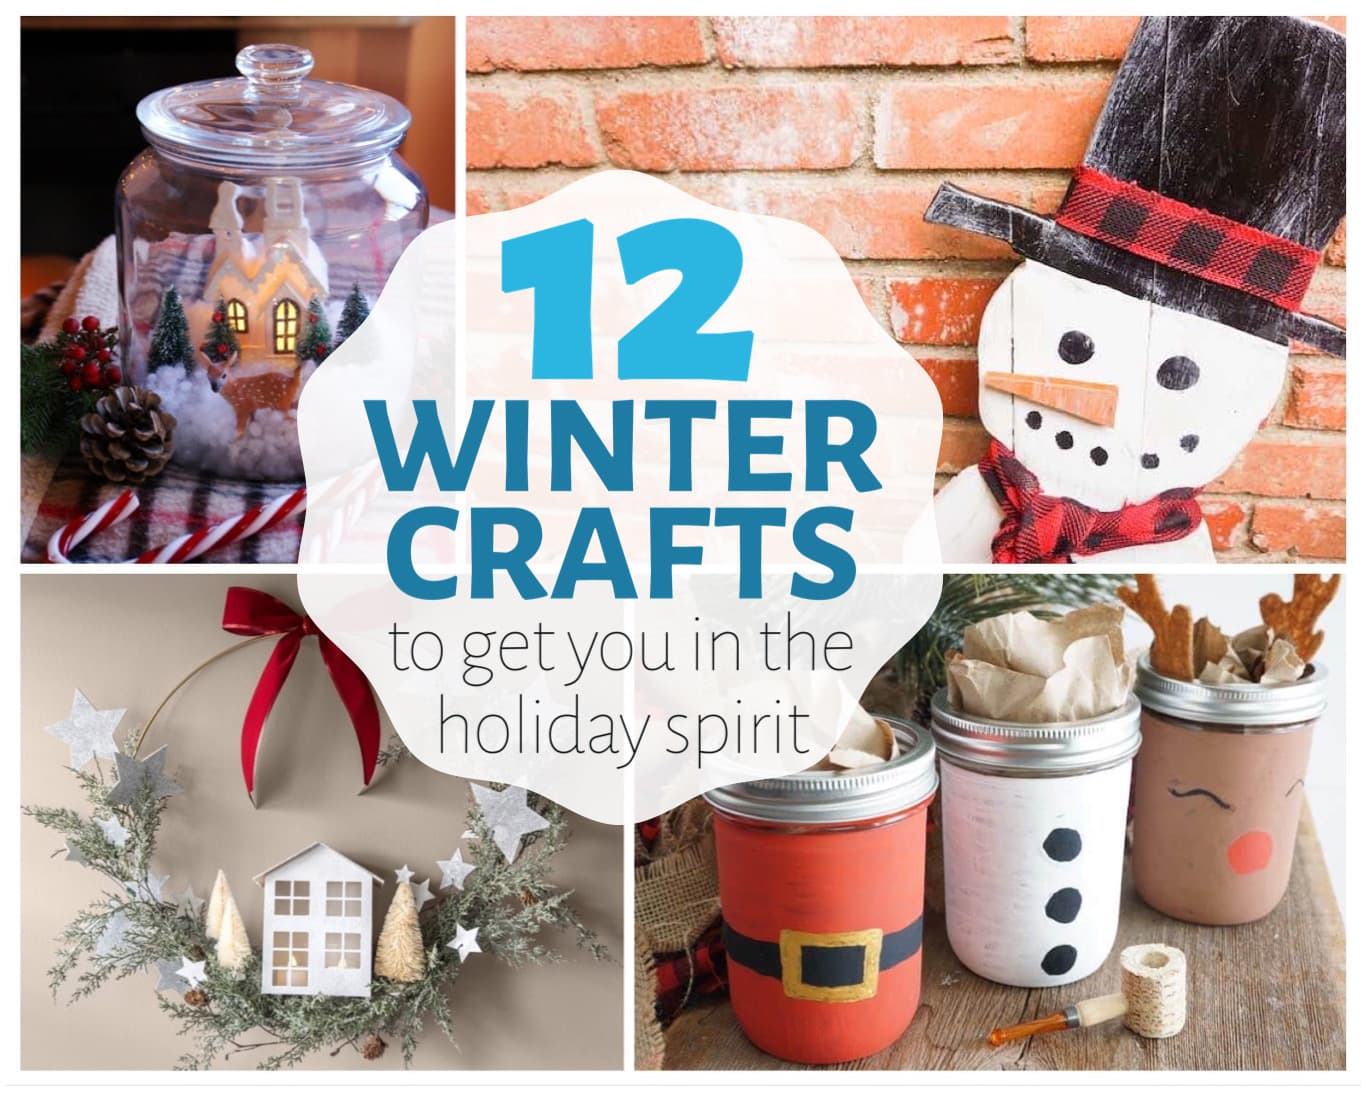 12 Winter Crafts to Get You in the Holiday Spirit – DFW Craft Shows